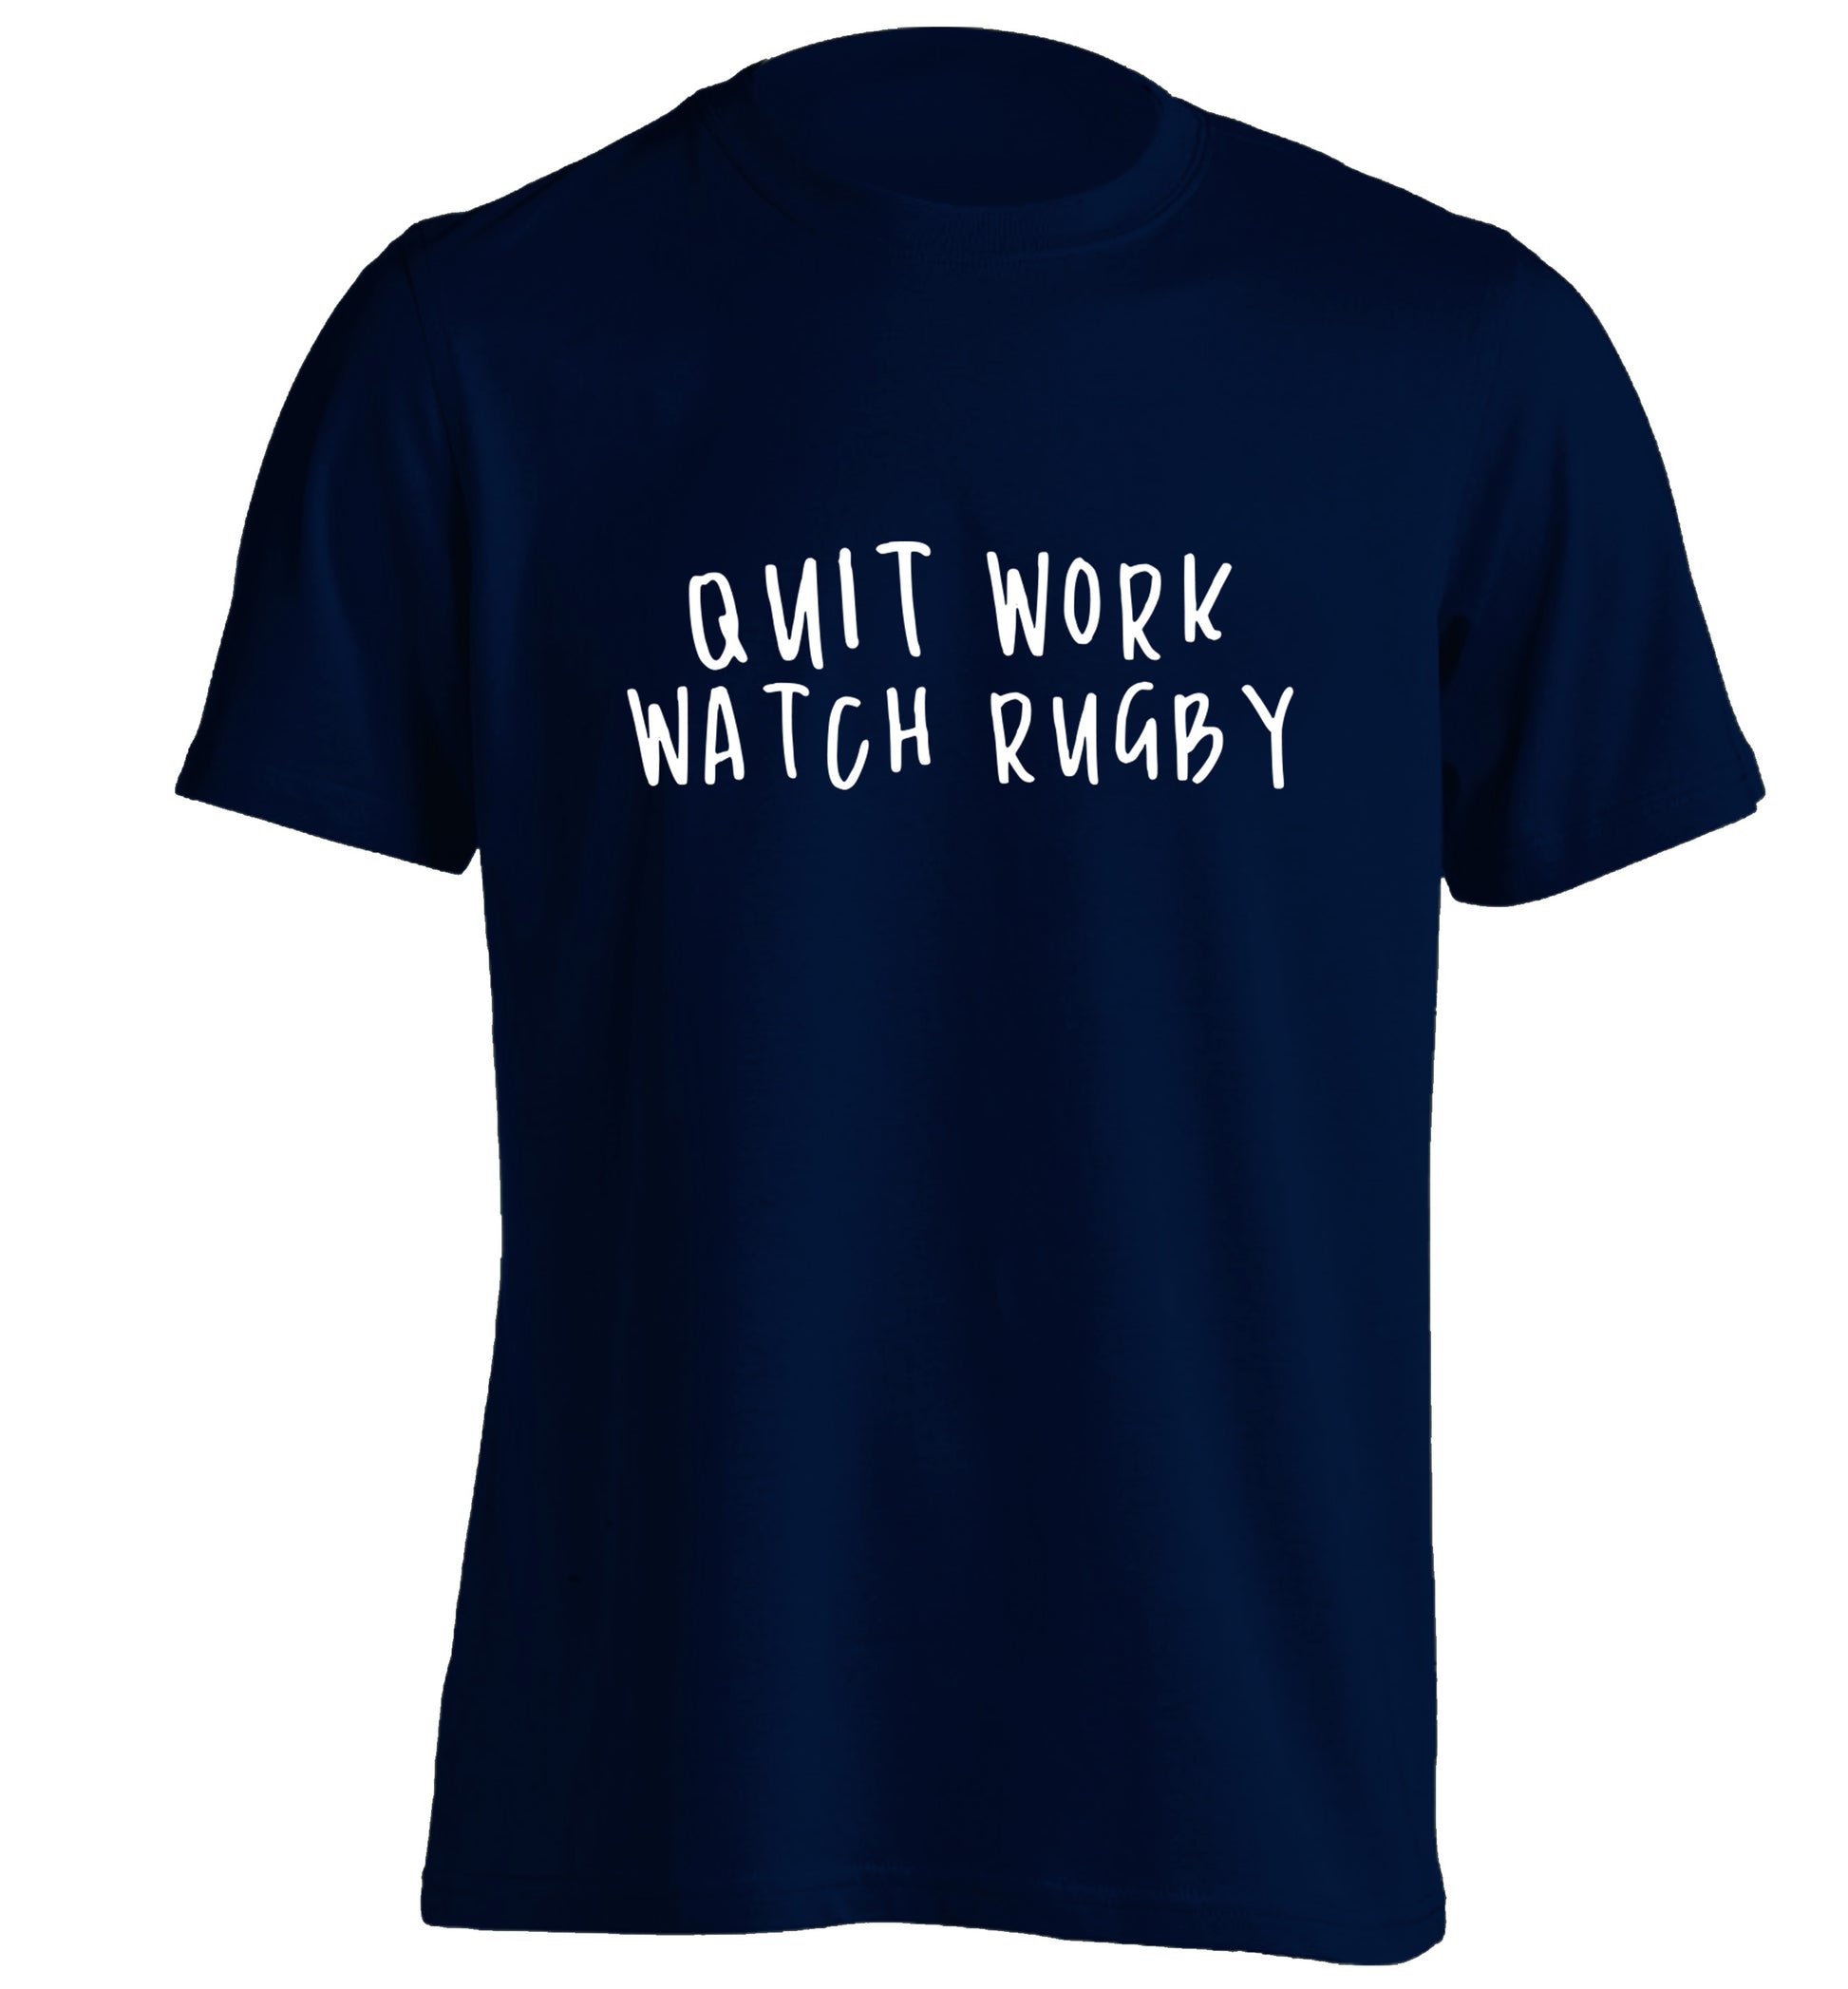 Quit work watch rugby adults unisex navy Tshirt 2XL